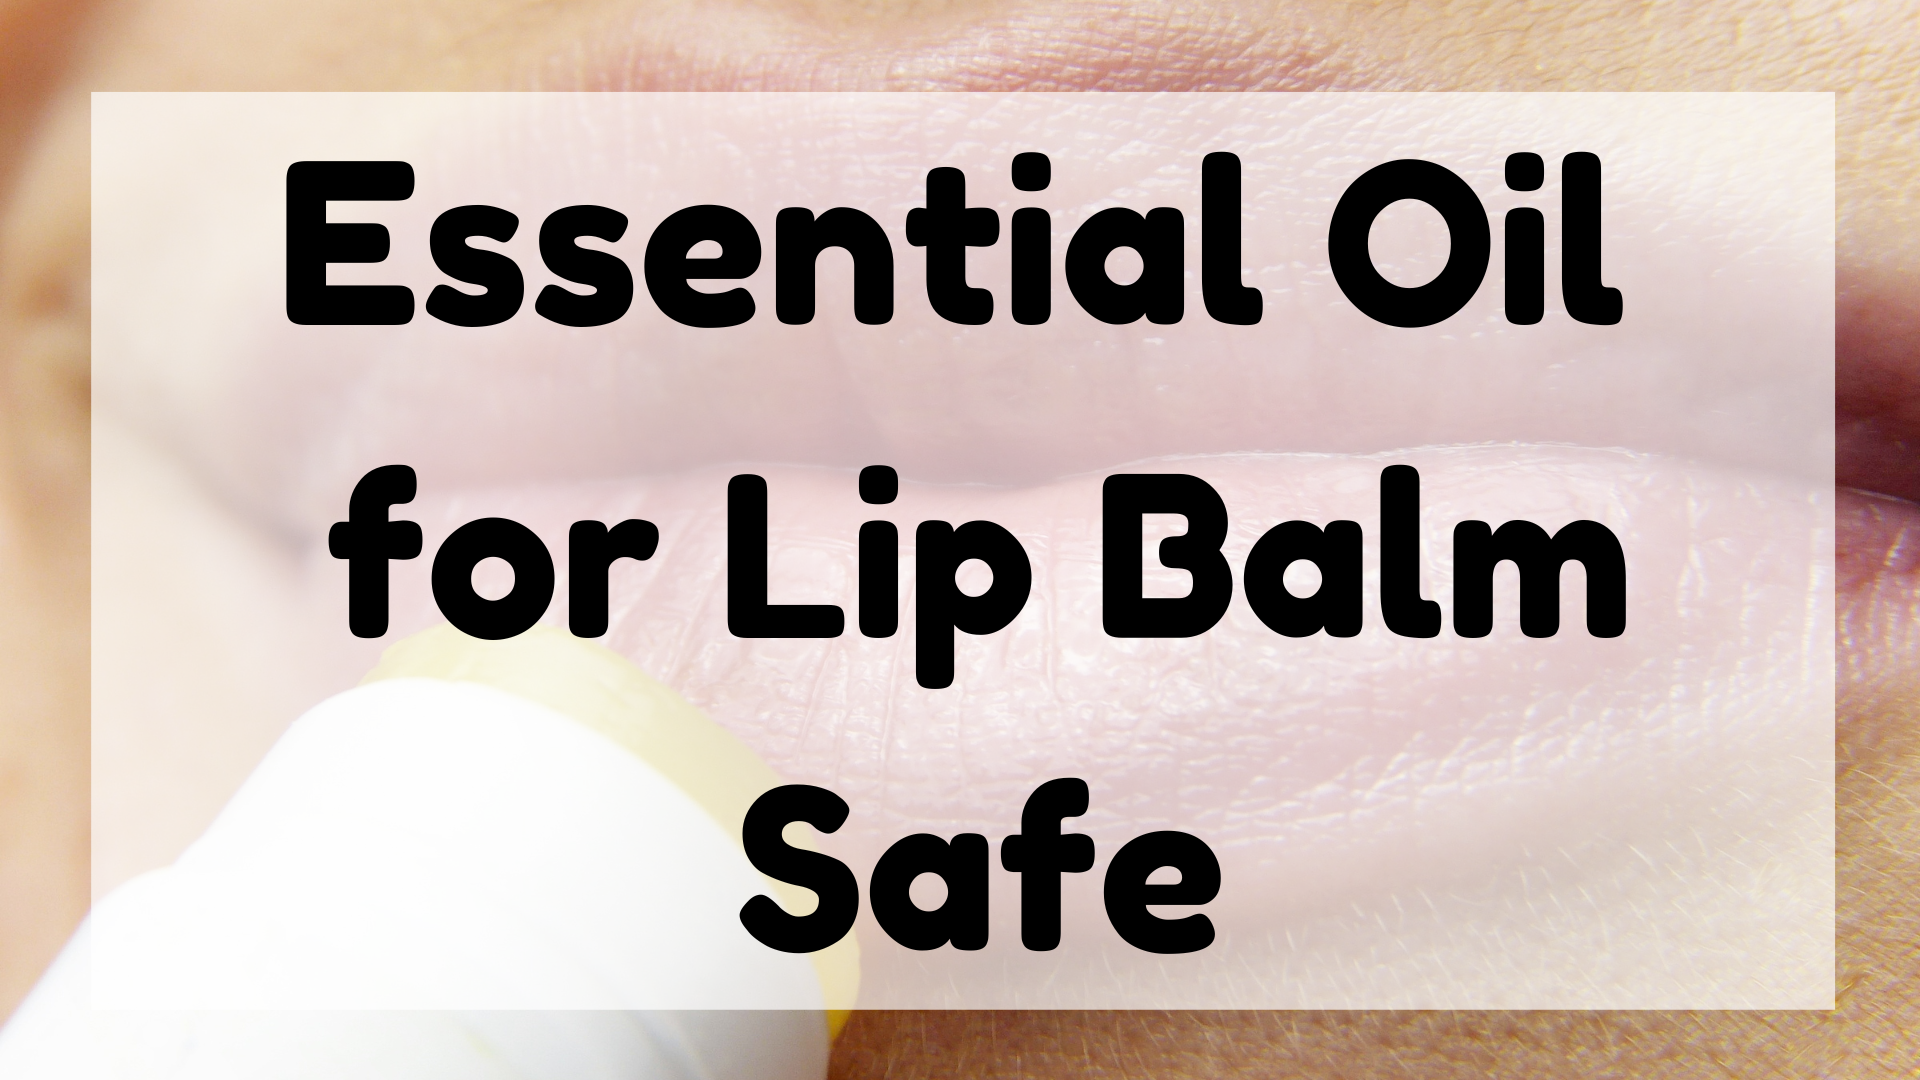 Essential Oil for Lip Balm Safe featured image